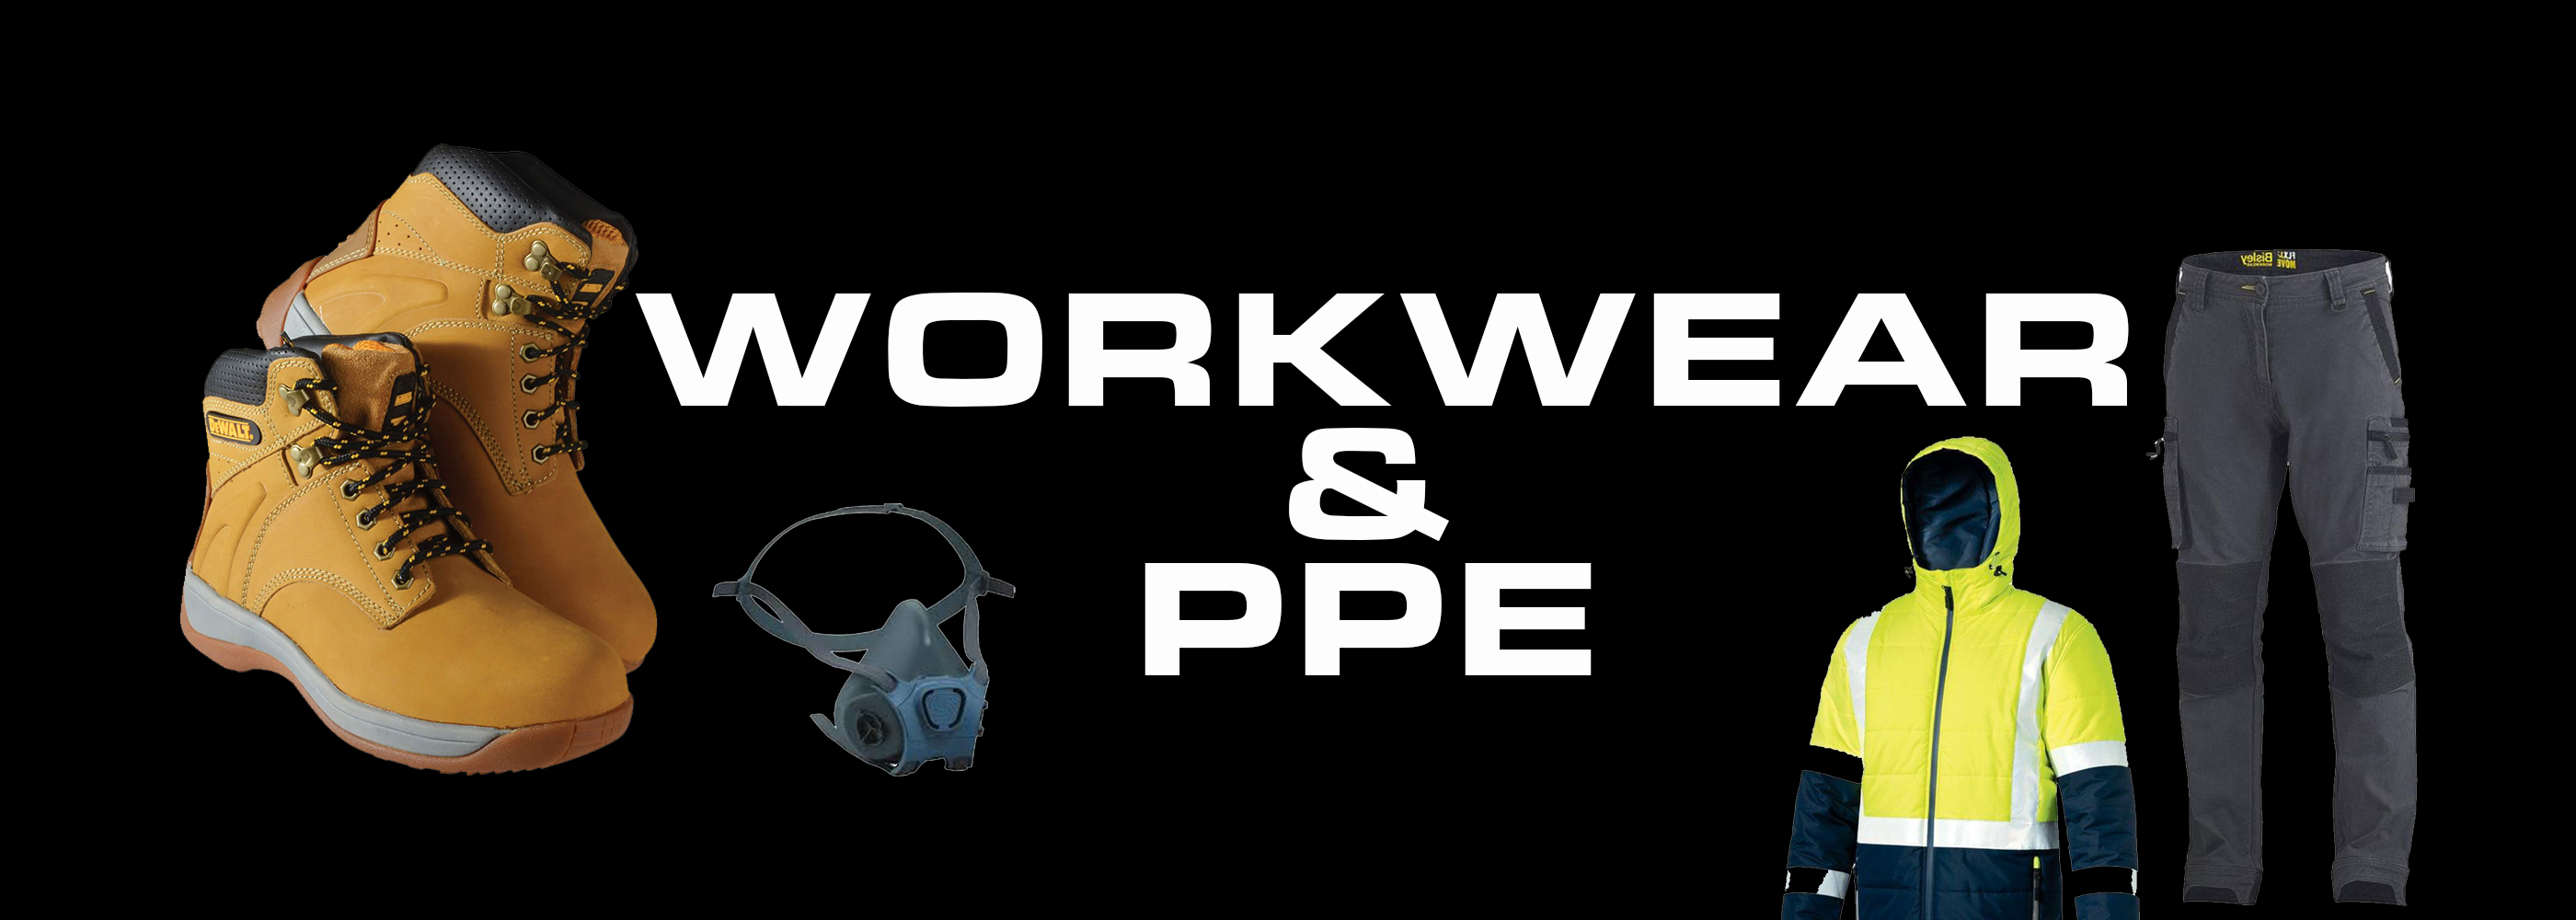 WORKWEAR & PPE CATEGORY FOR UNITED FIXINGS ONLINE